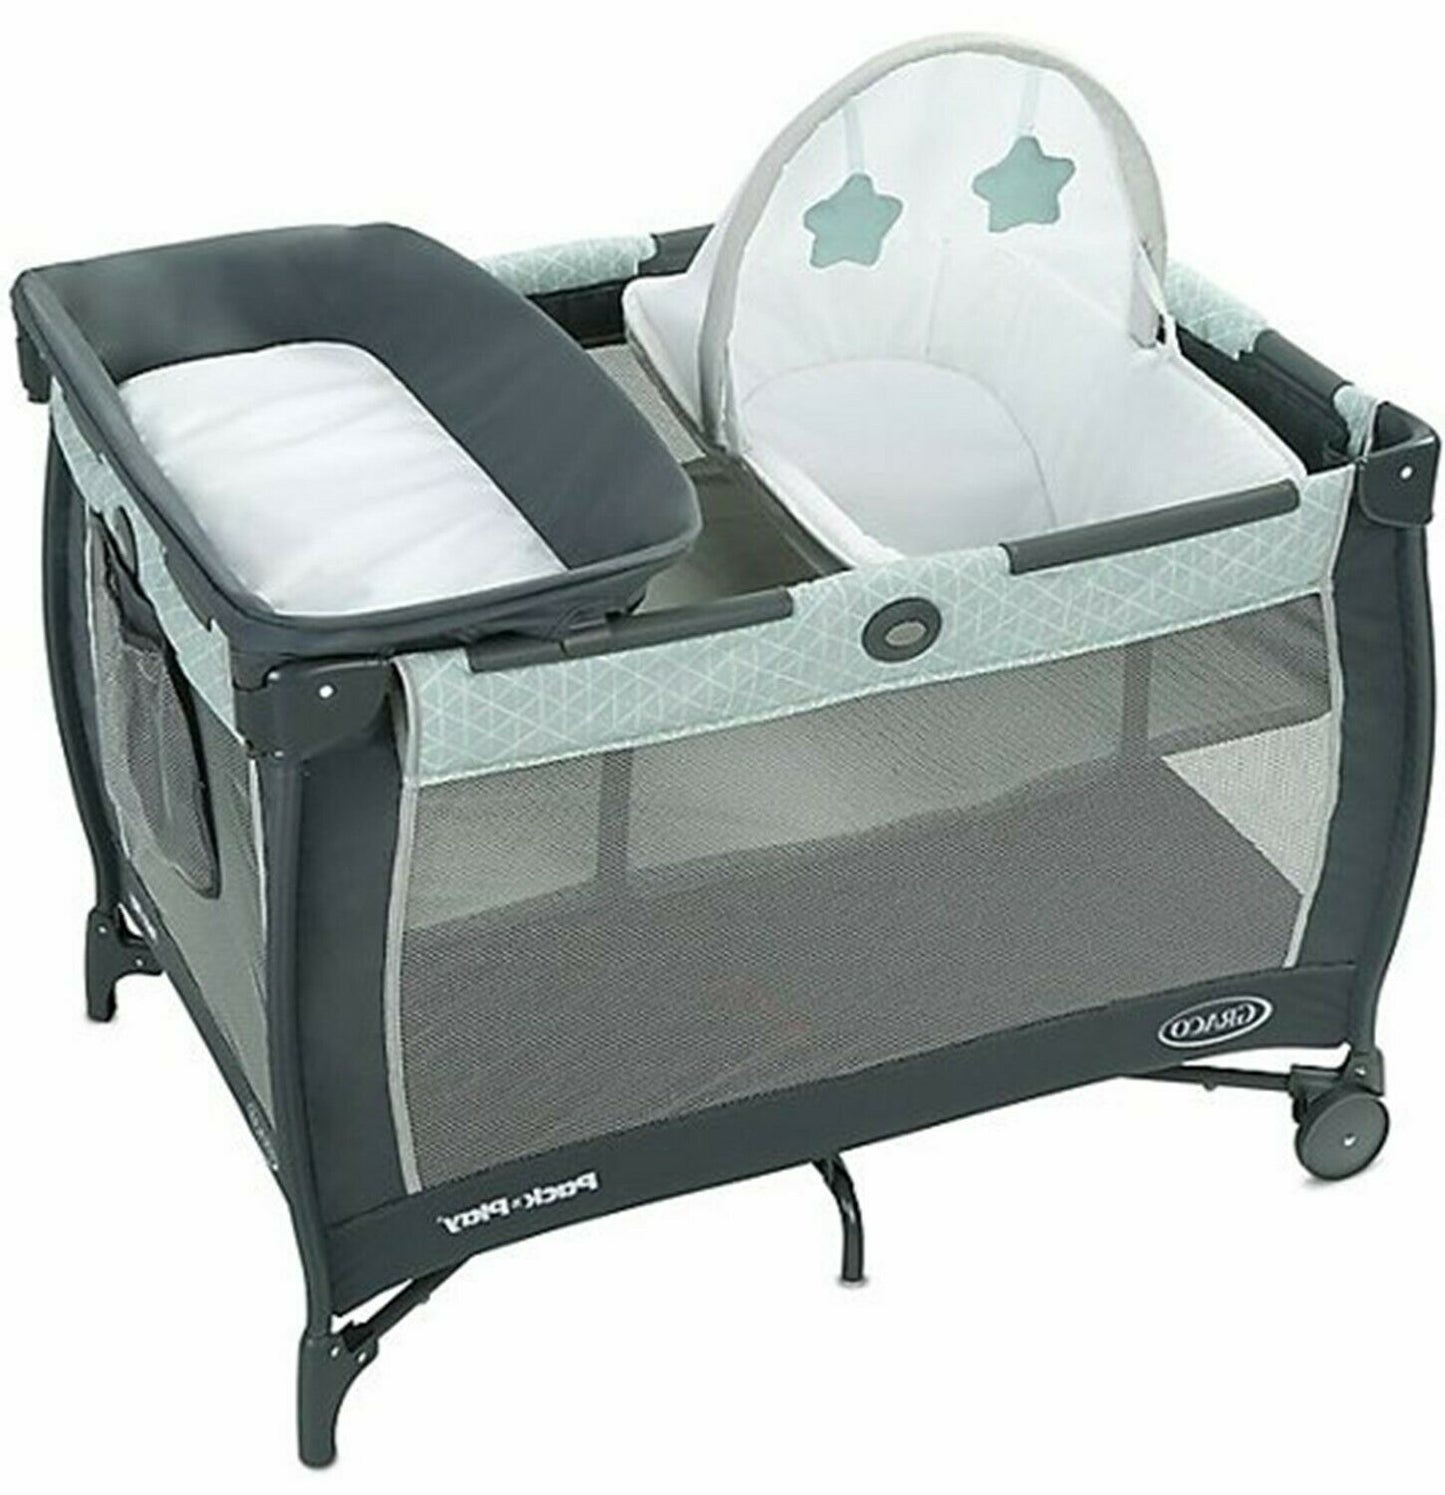 Graco Baby Stroller Travel with Car Seat Base Infant Playard Bassinet Chair New